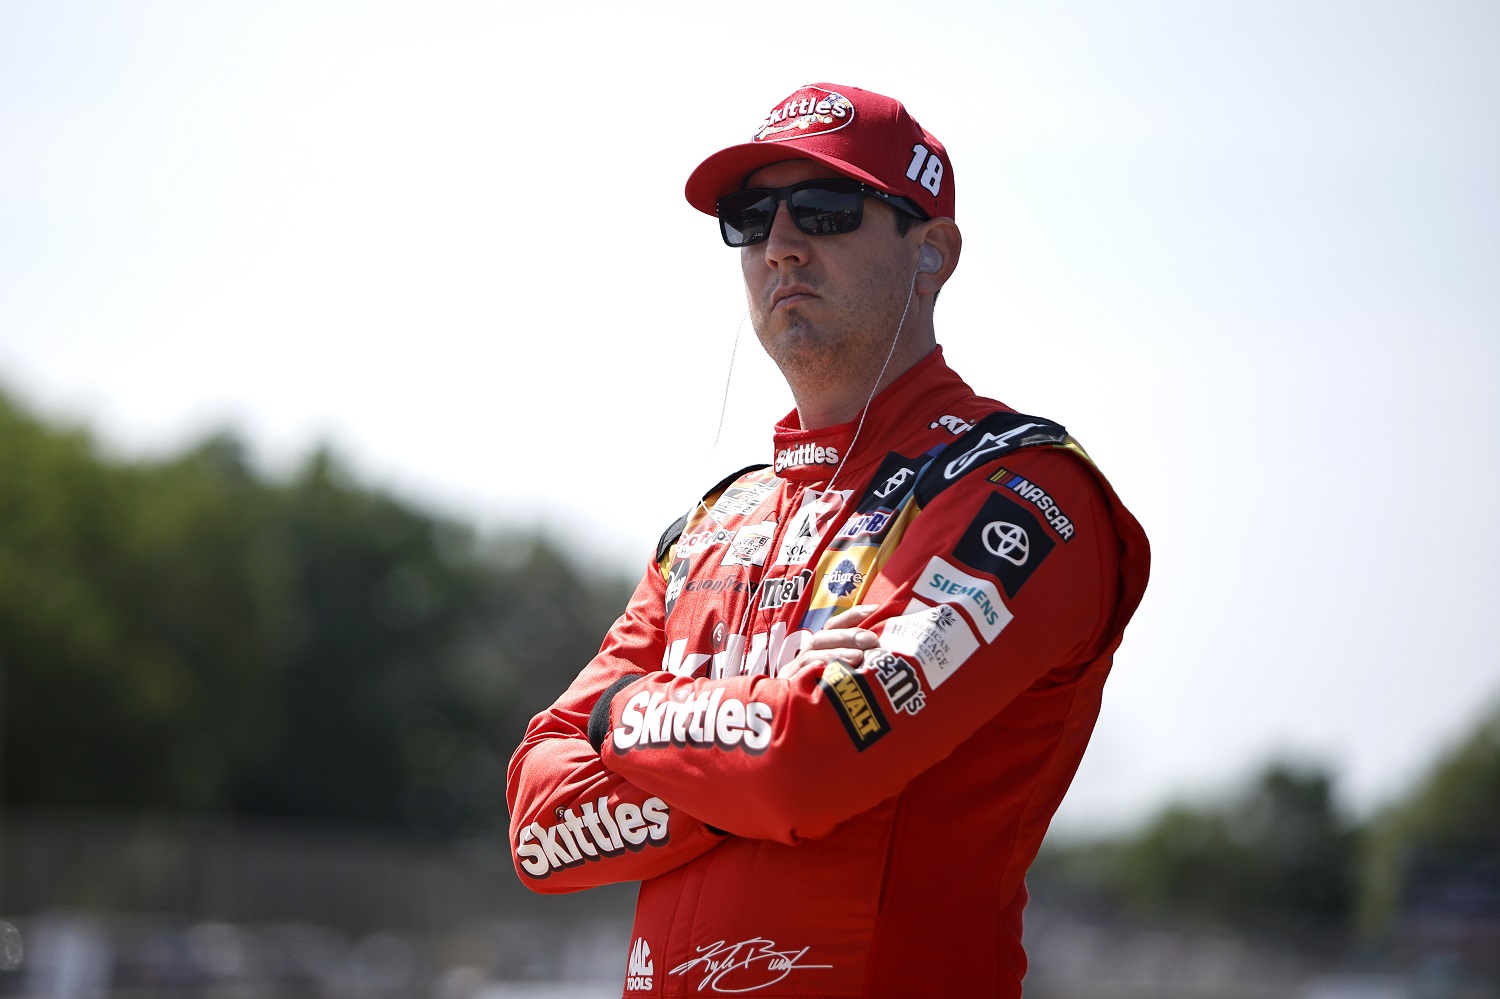 Kyle Busch looks on during practice for the NASCAR Cup Series Kwik Trip 250 at Road America on July 02, 2022, in Elkhart Lake, Wisconsin.